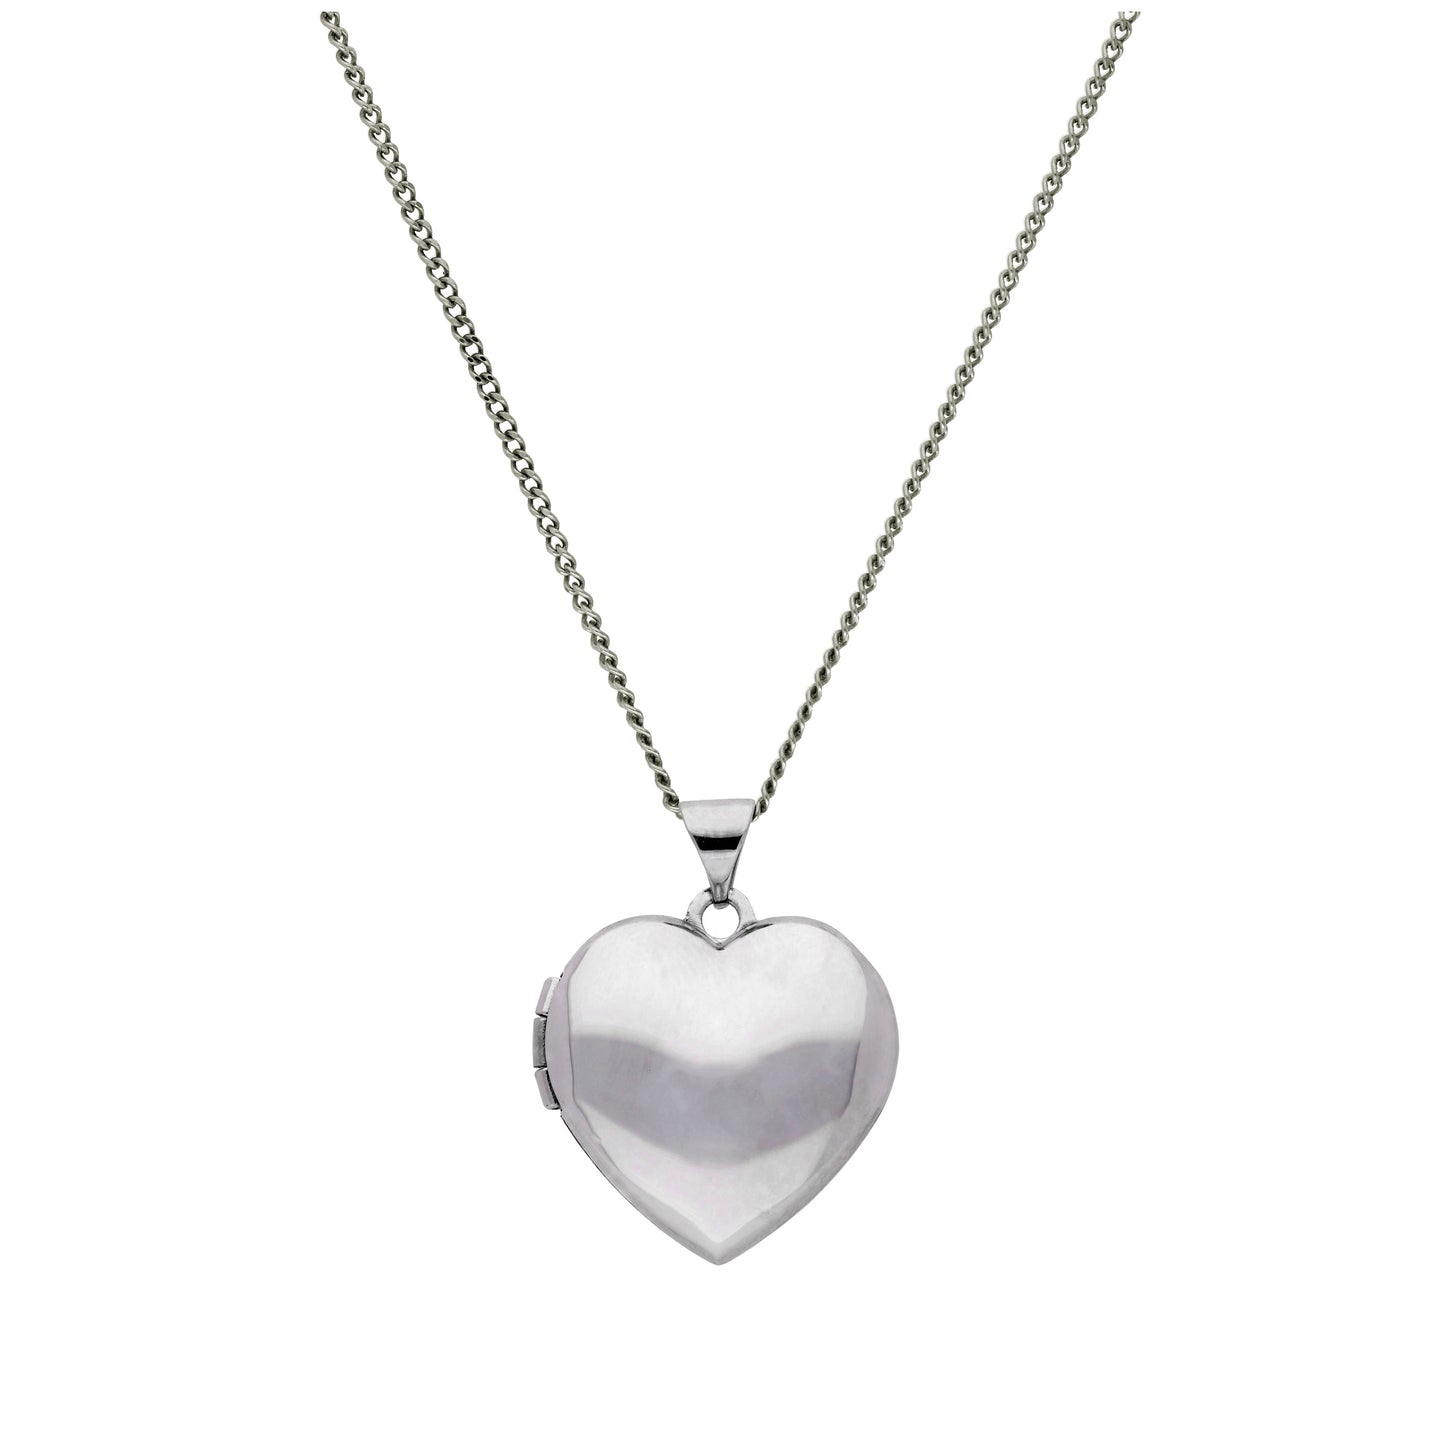 9ct White Gold Engravable Heart Locket on Chain 16 - 18 Inches